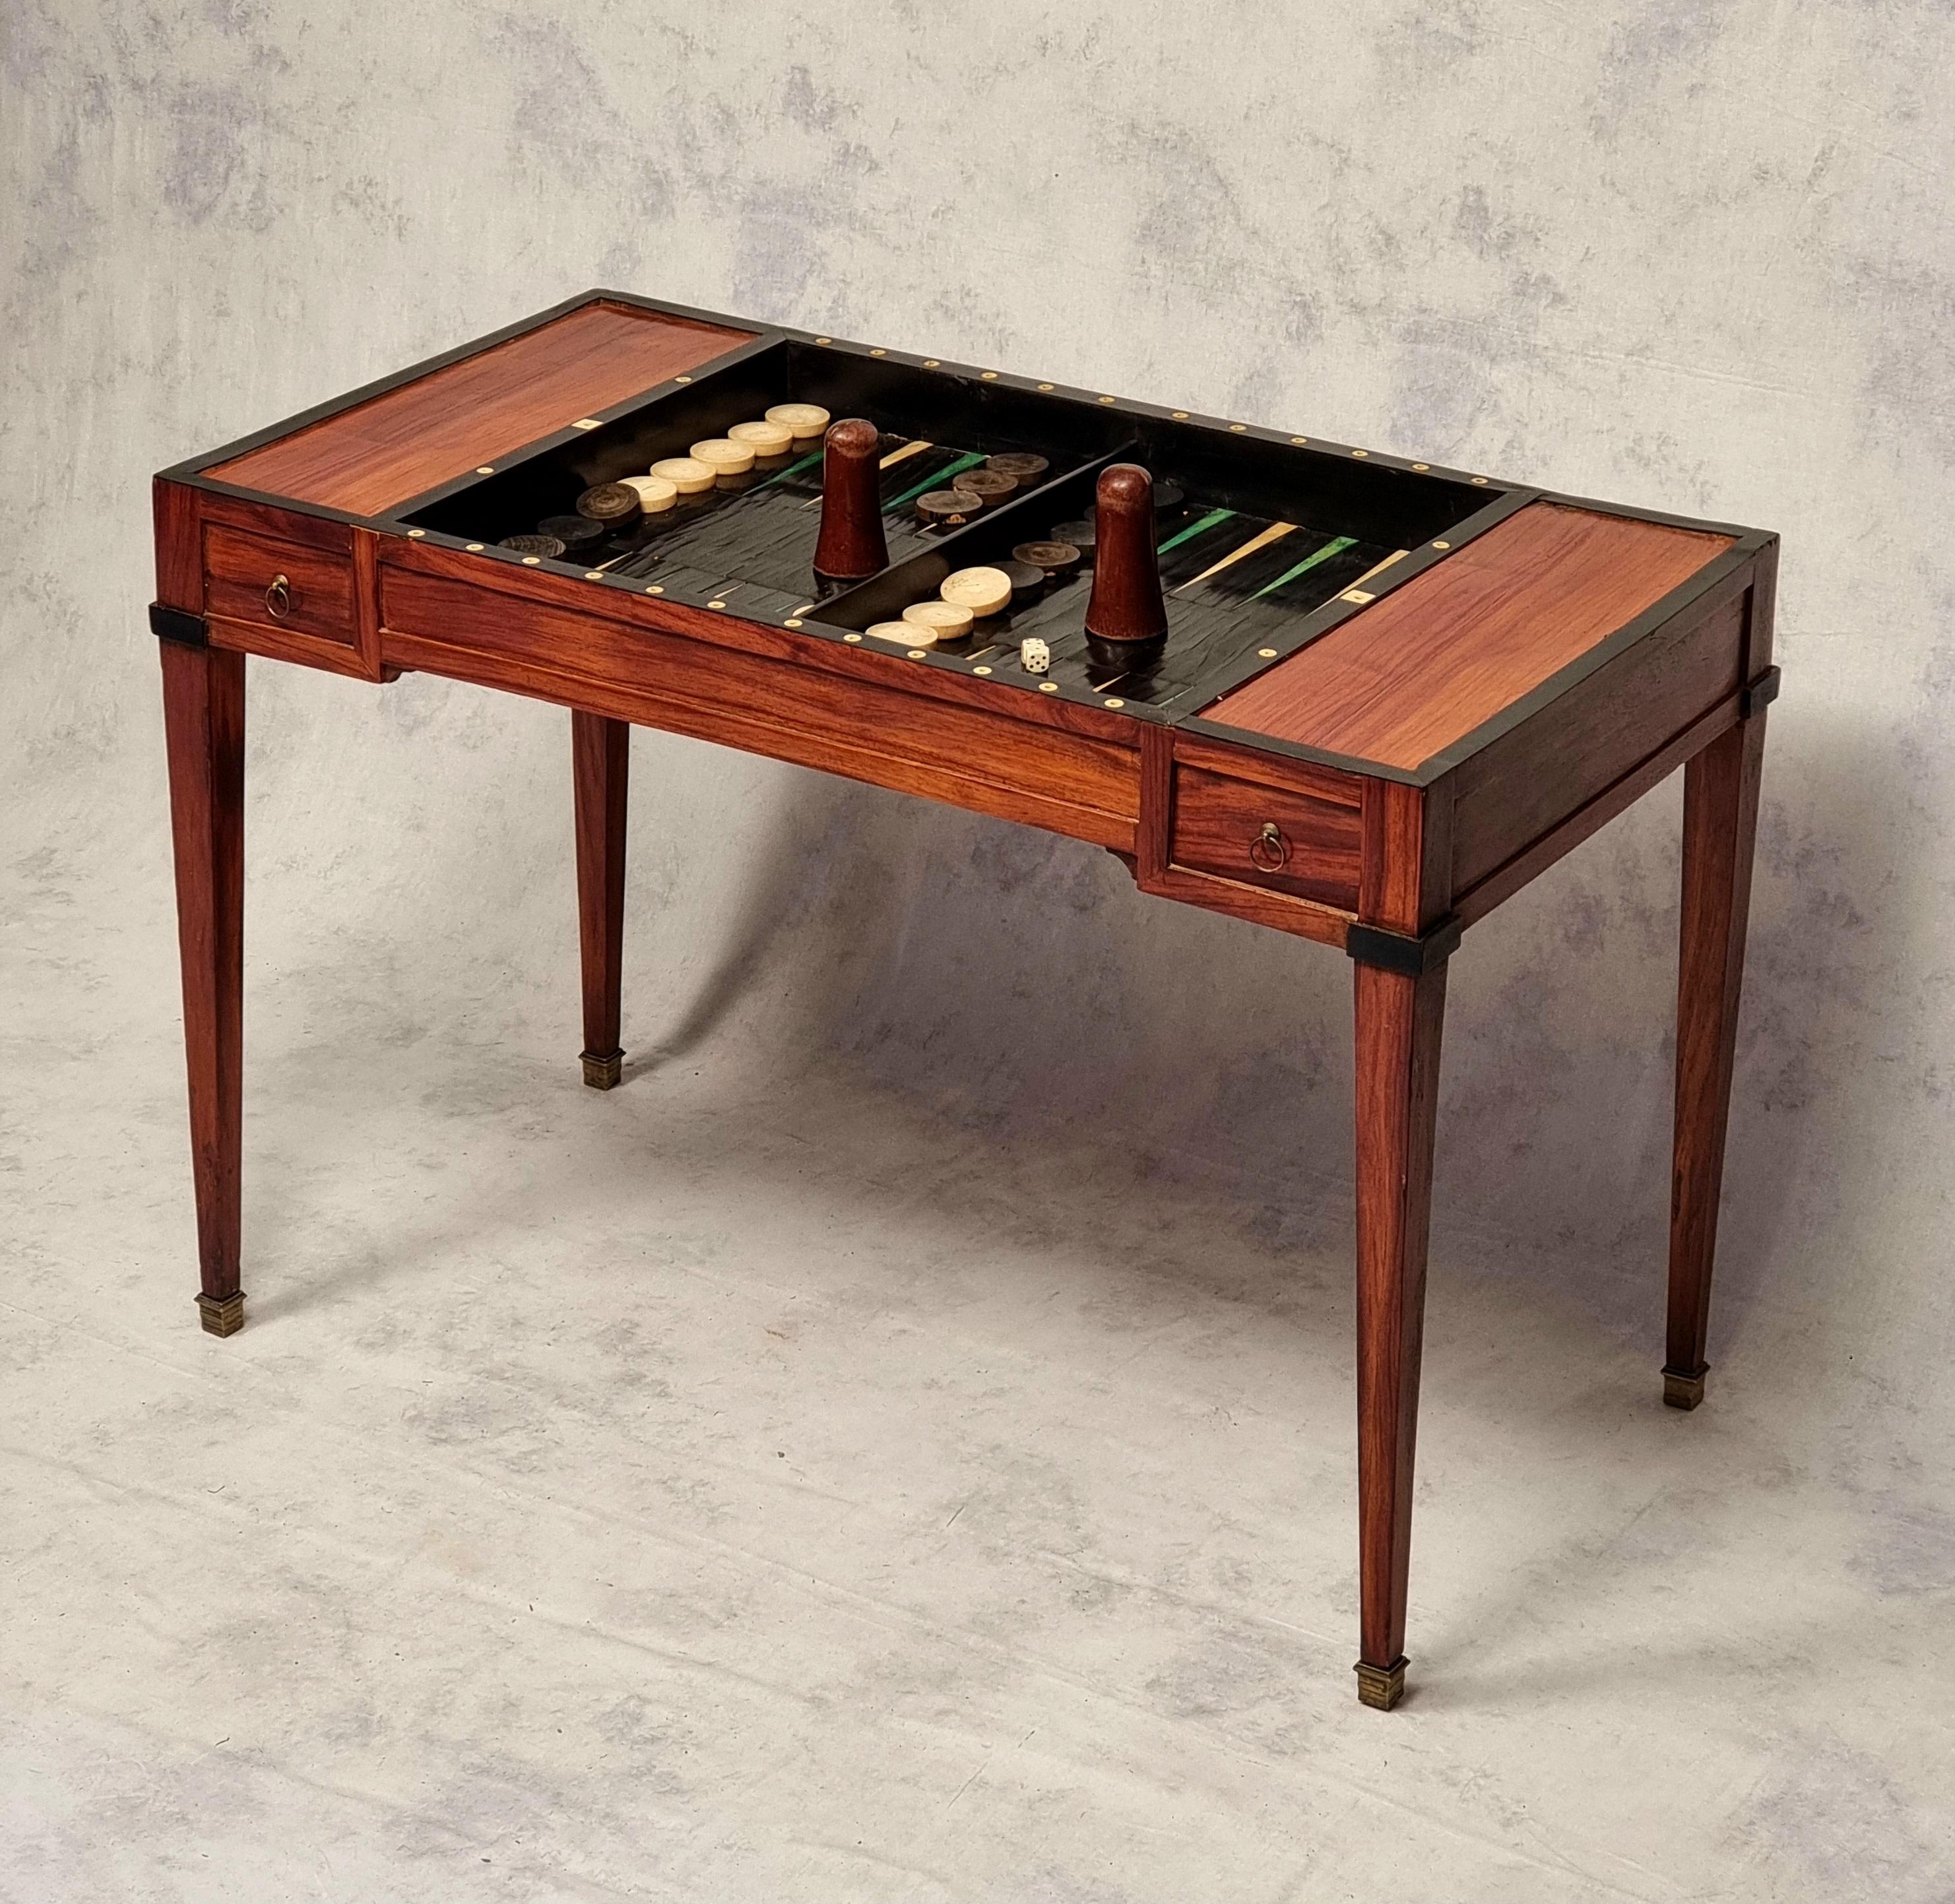 Directoire Period Games Table - Rosewood & Ebony - 18th In Good Condition For Sale In SAINT-OUEN-SUR-SEINE, FR